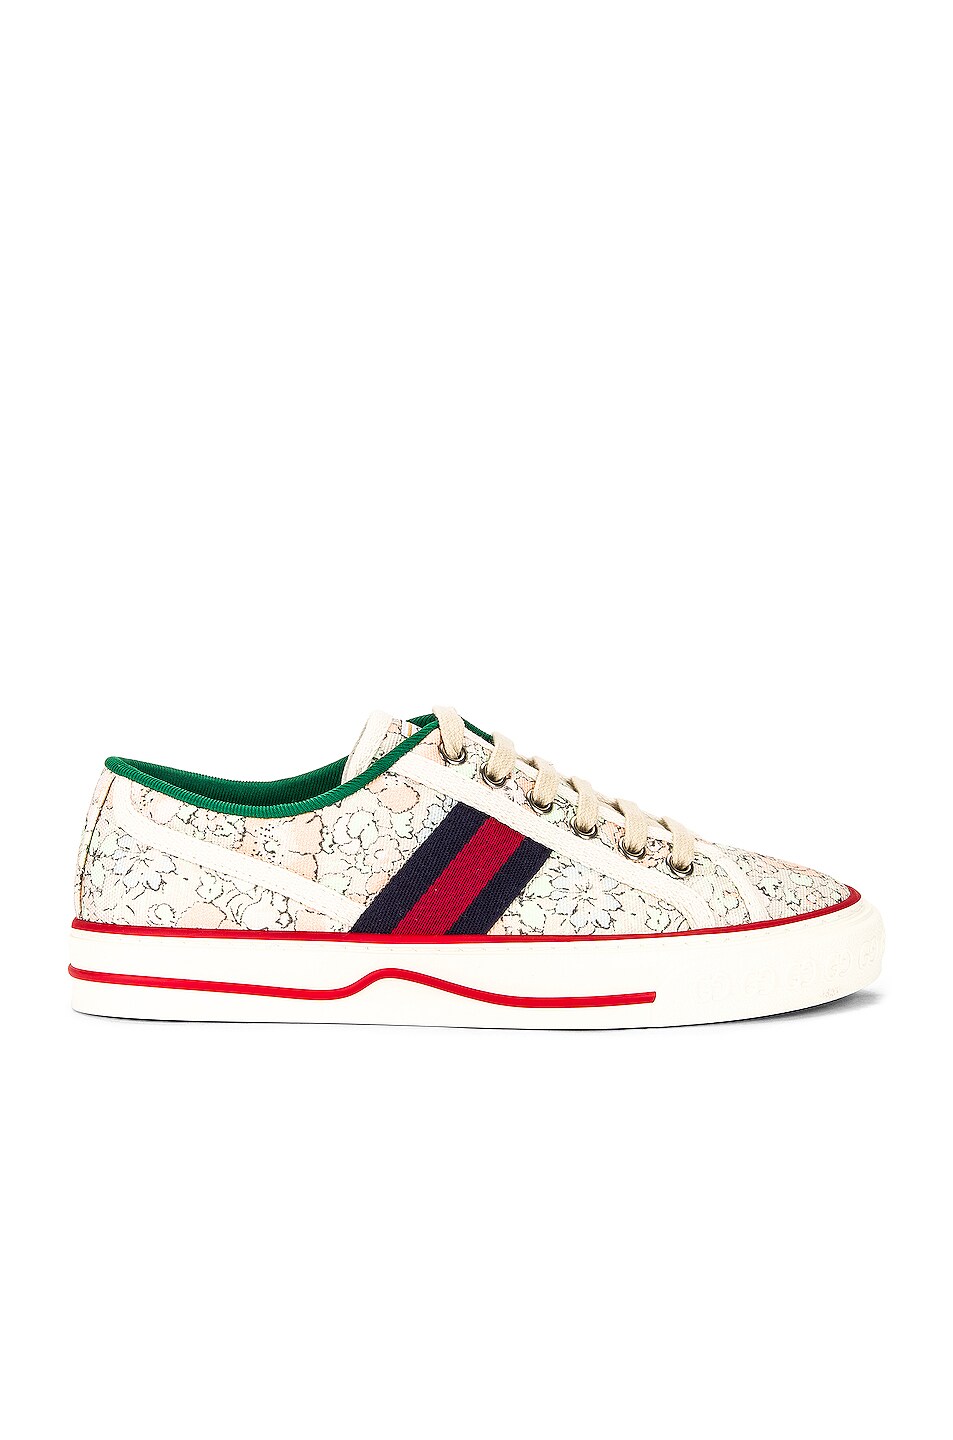 Image 1 of Gucci Gucci Tennis 1977 Sneaker in Mint Peach & White & Blue & Red